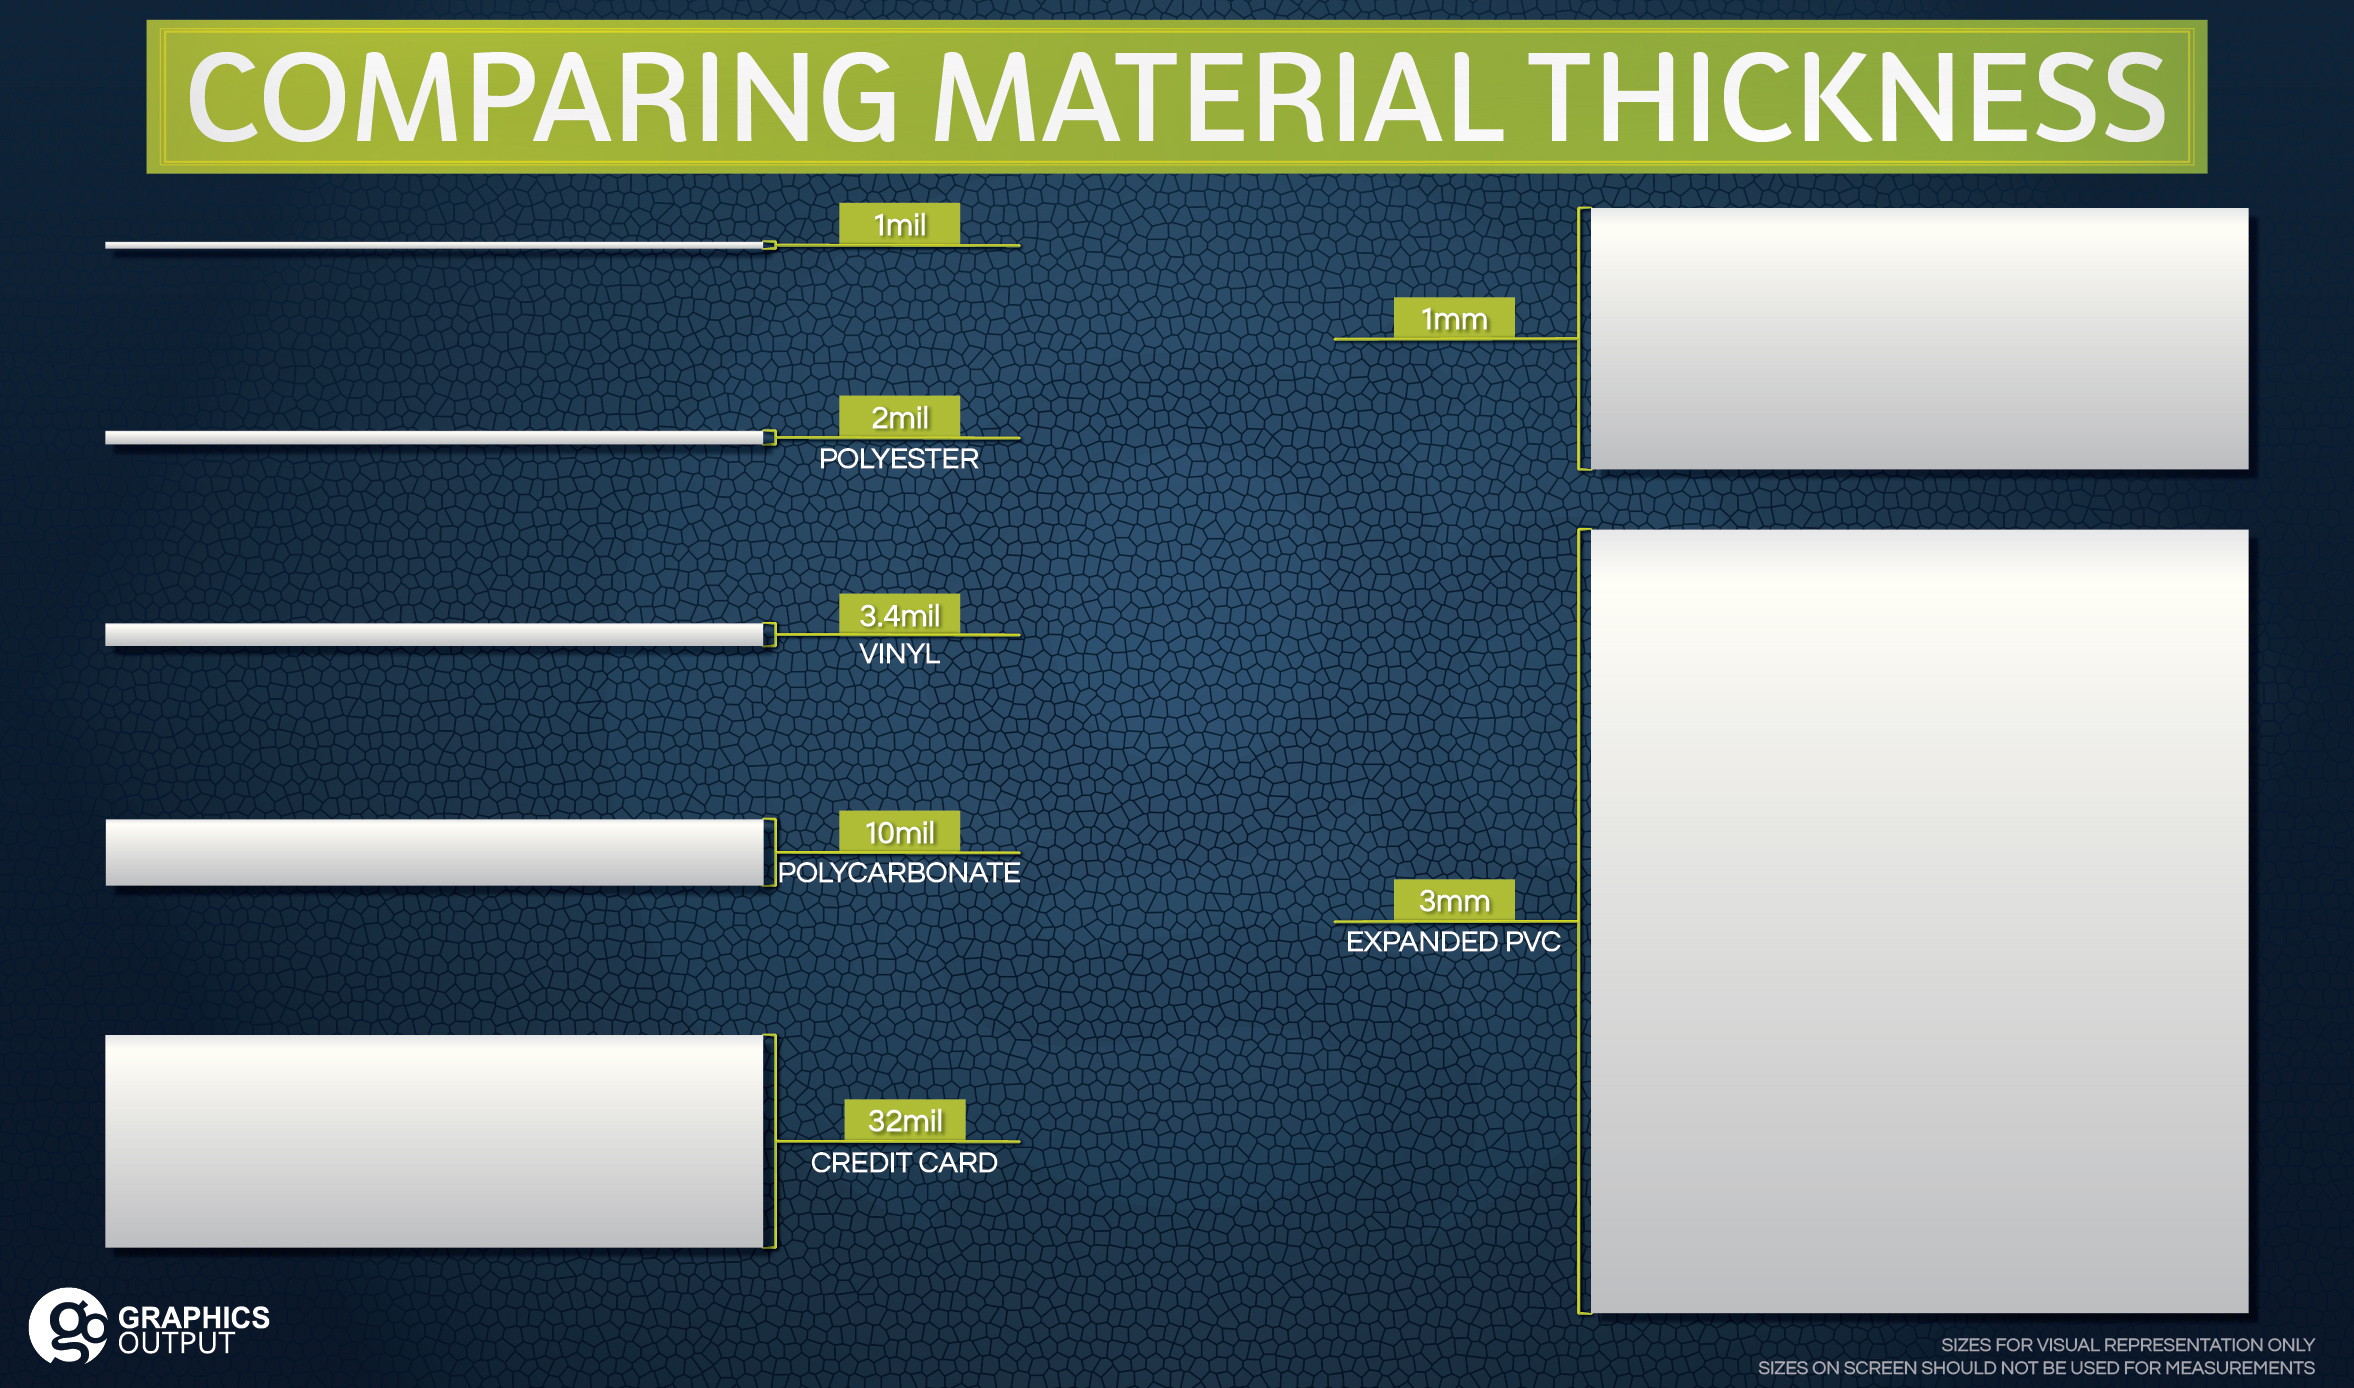 Comparison of common graphic material thicknesses, including mils vs millimeters (mils vs mm)